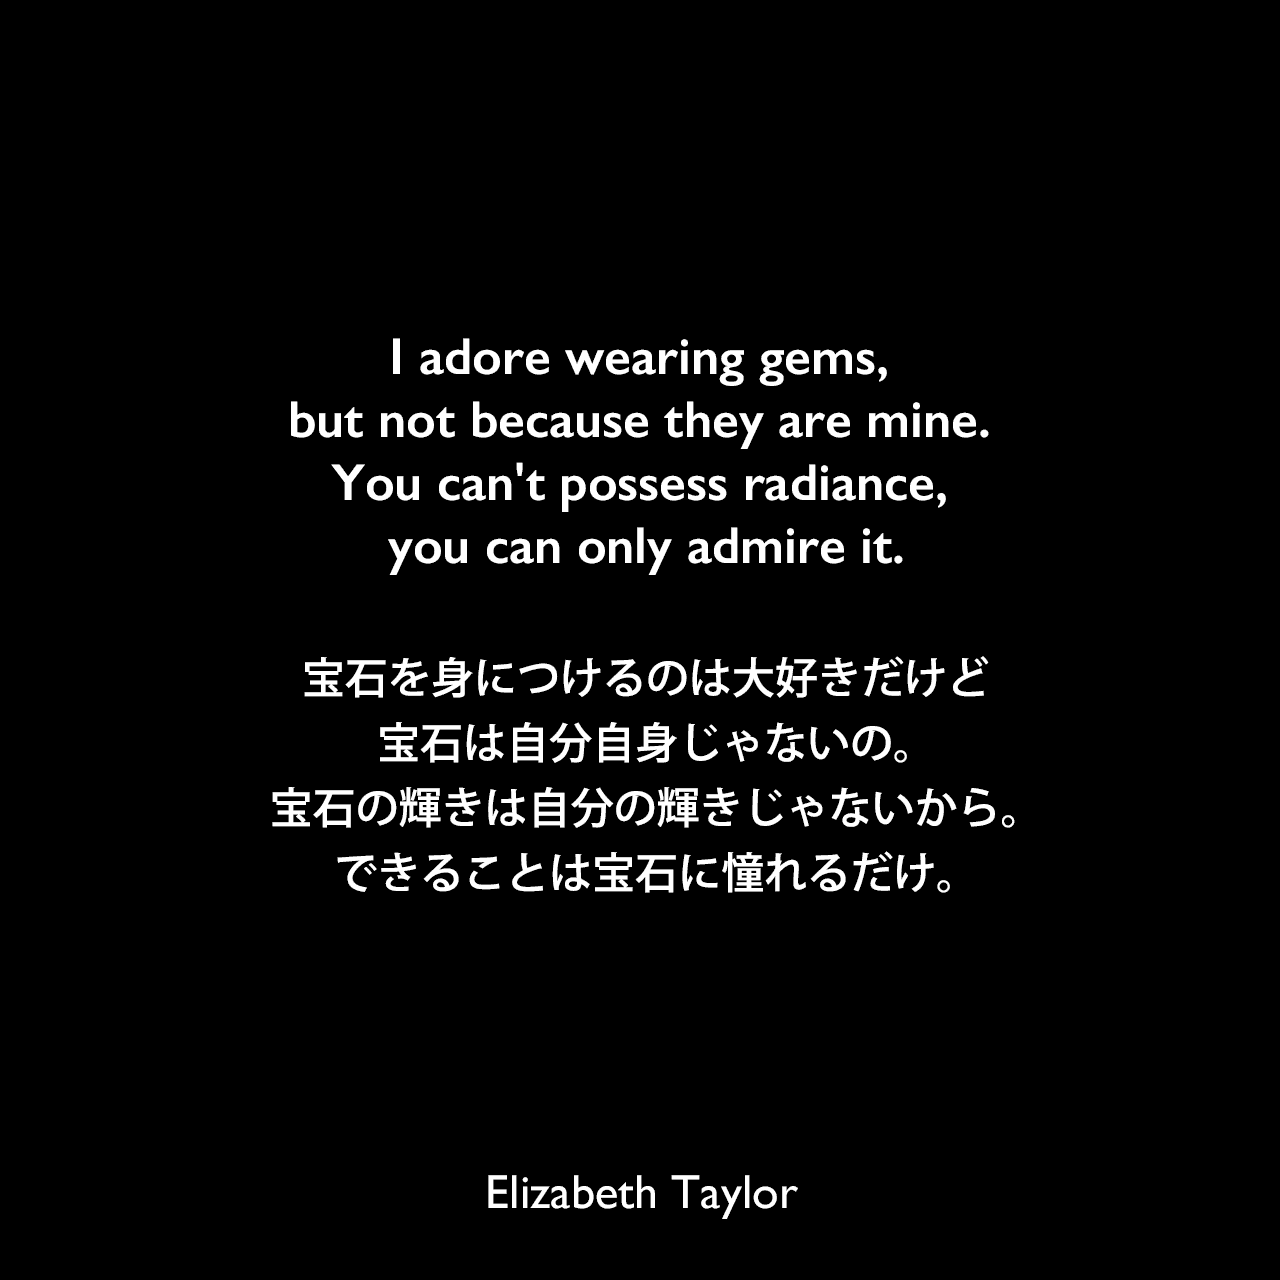 I adore wearing gems, but not because they are mine. You can't possess radiance, you can only admire it.宝石を身につけるのは大好きだけど、宝石は自分自身じゃないの。宝石の輝きは自分の輝きじゃないから。できることは宝石に憧れるだけ。Elizabeth Taylor